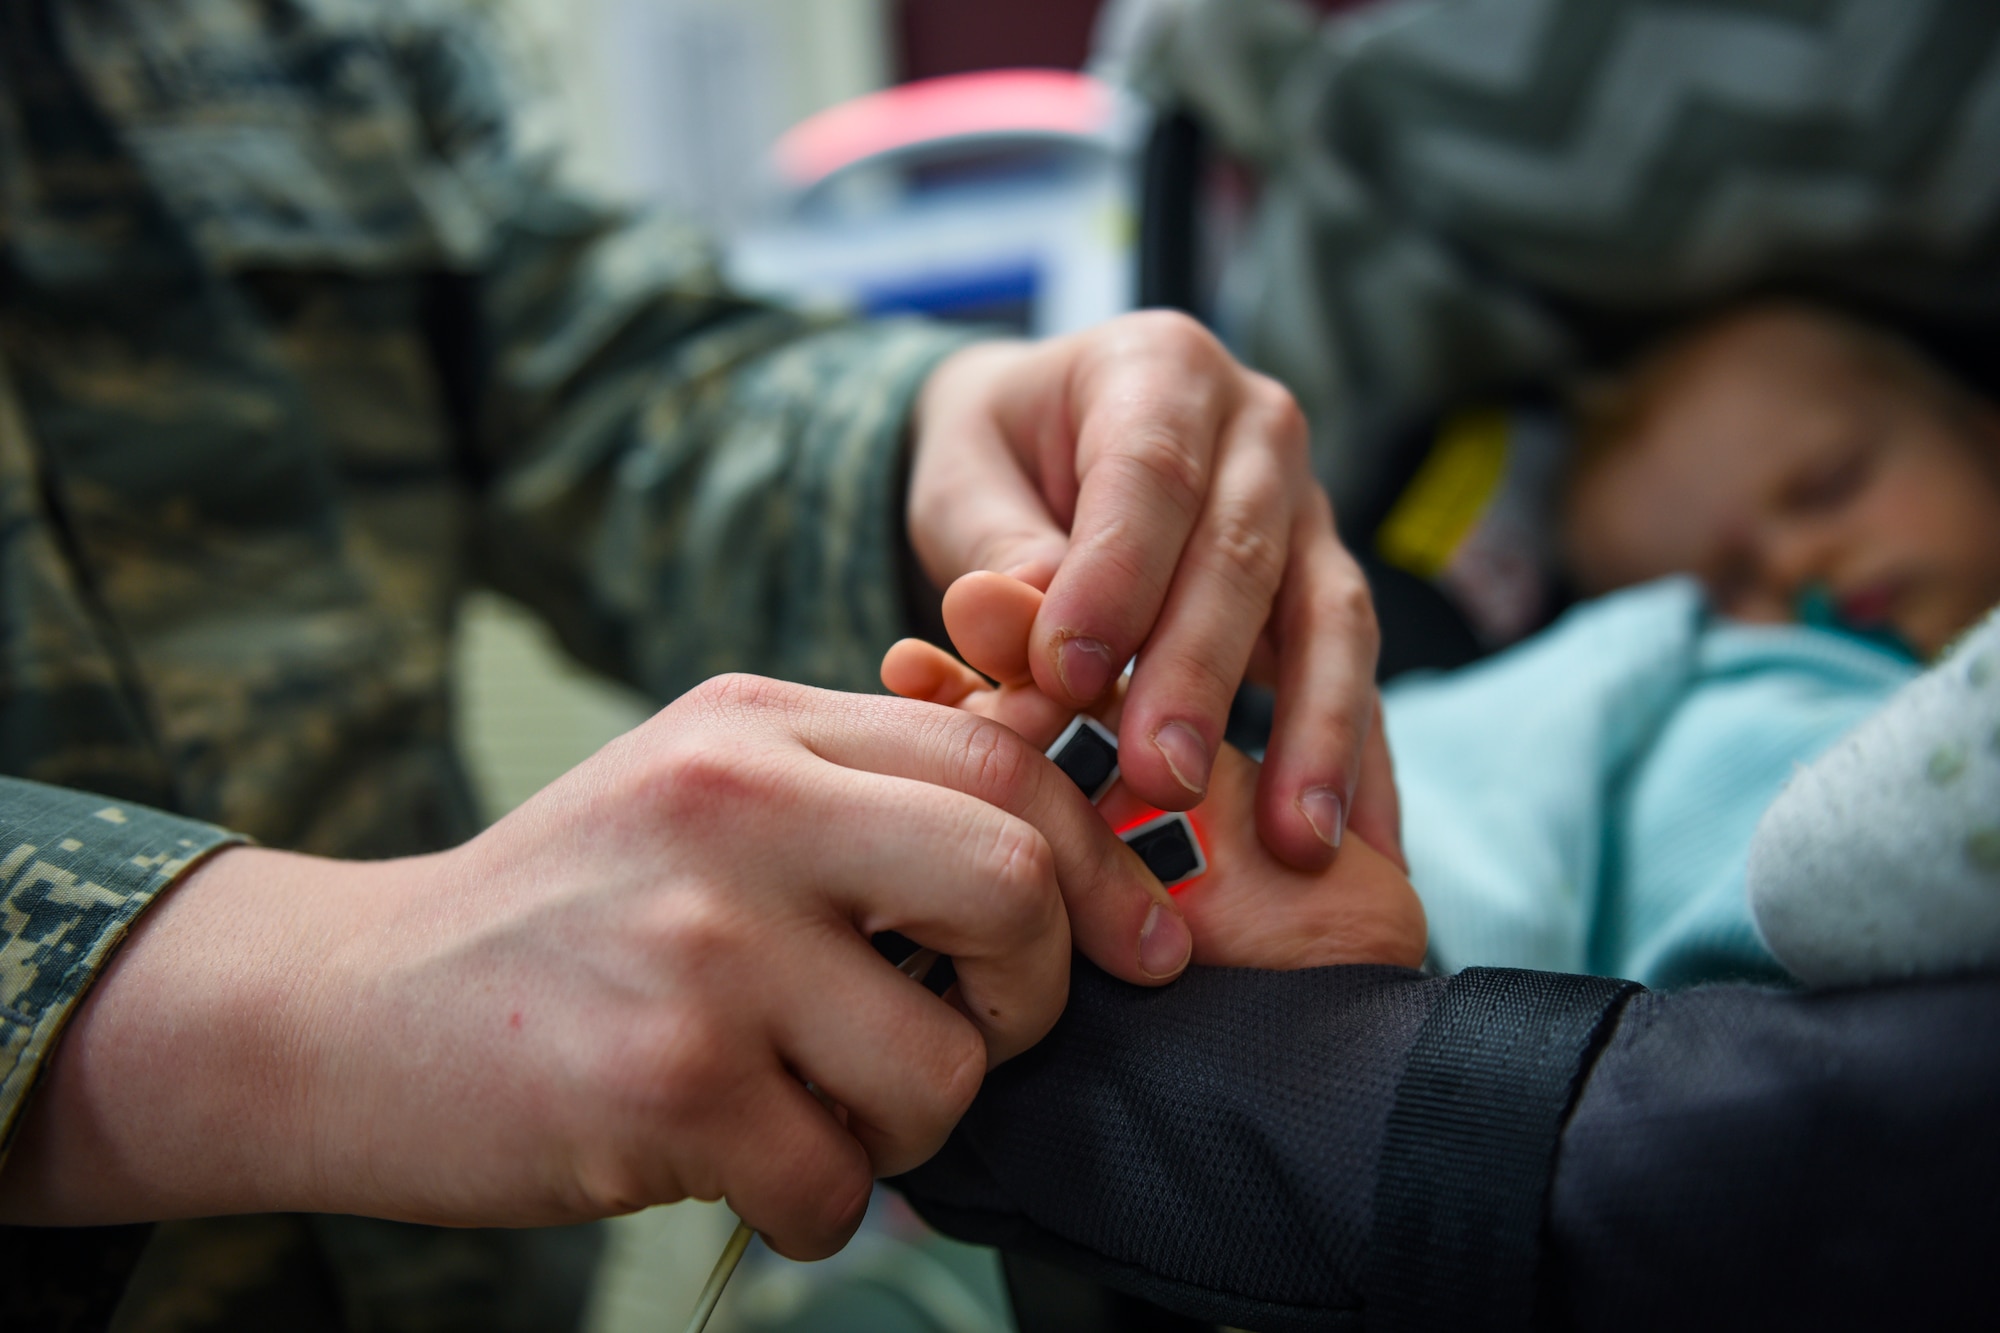 U.S. Air Force Airman 1st Class Levi Brown, 92nd Medical Group aerospace medical technician, monitors the oxygen saturation of a patient’s blood during a check-up at Fairchild Air Force Base, Wash., April 4, 2018. The pediatric team implemented a new concept of operations: rewarding, efficiency, setting priorities and empowering team members, or RESET, to their system of patient care. The integration of RESET in the Military Health System Genesis workflow has improved the clinic’s goals of patient access and care. (U.S. Air Force photo by Airman 1st Class Whitney Laine)